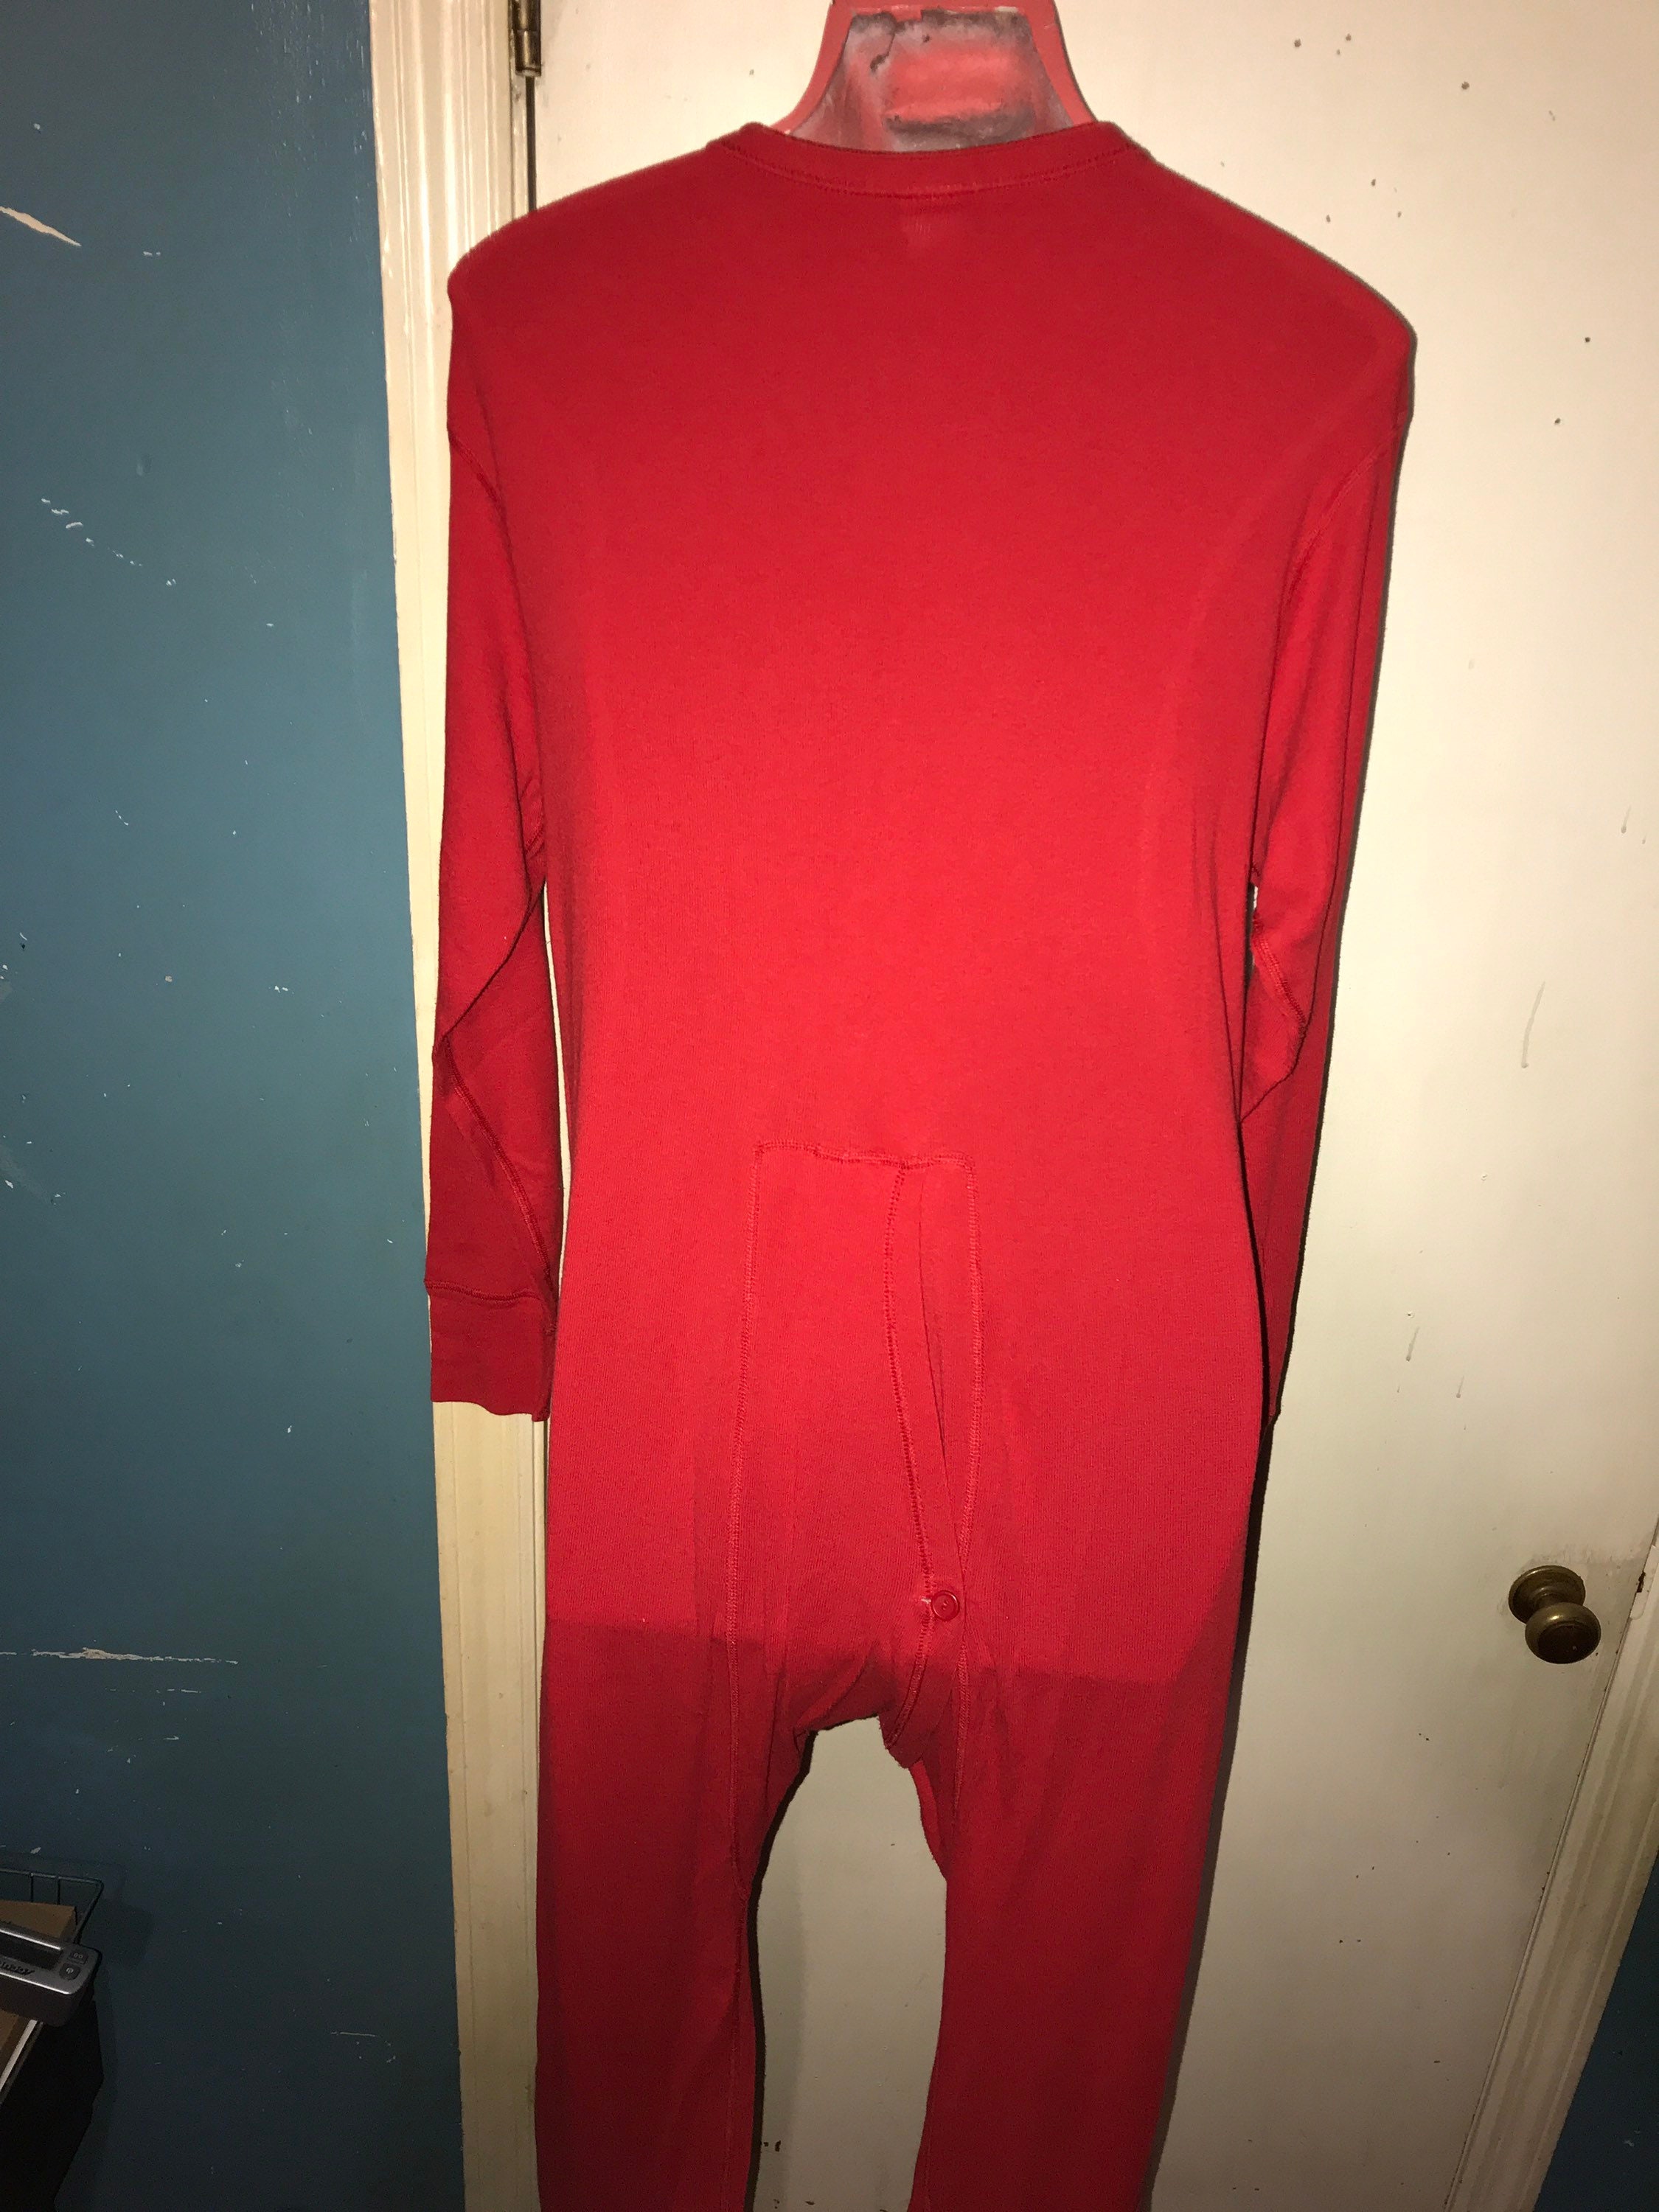 Vintage Red Union Suit With Rear Butt Flap. Thermal Onesie Long